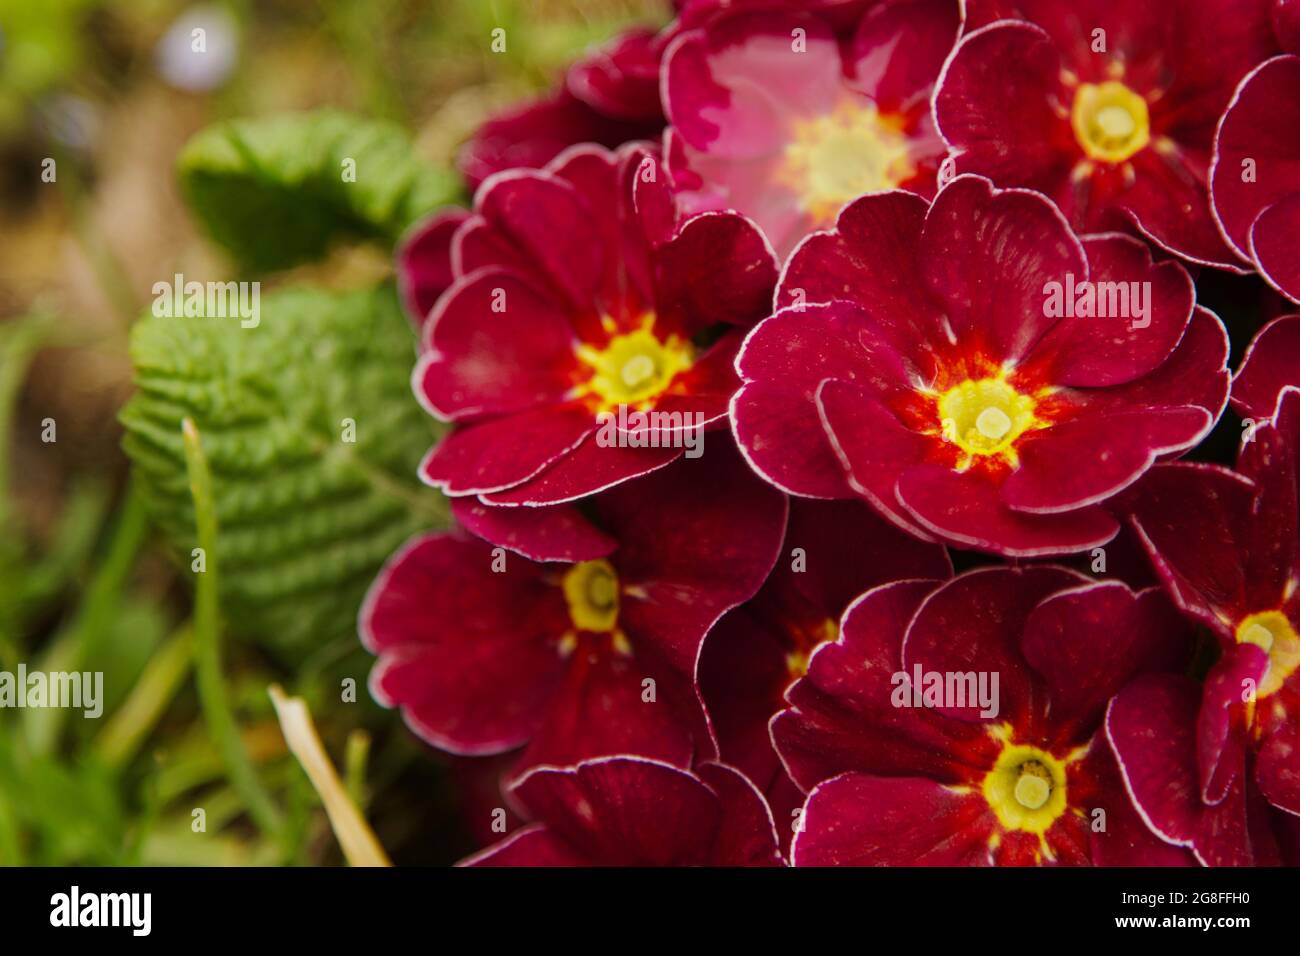 Red Primrose on natural blurred background Stock Photo